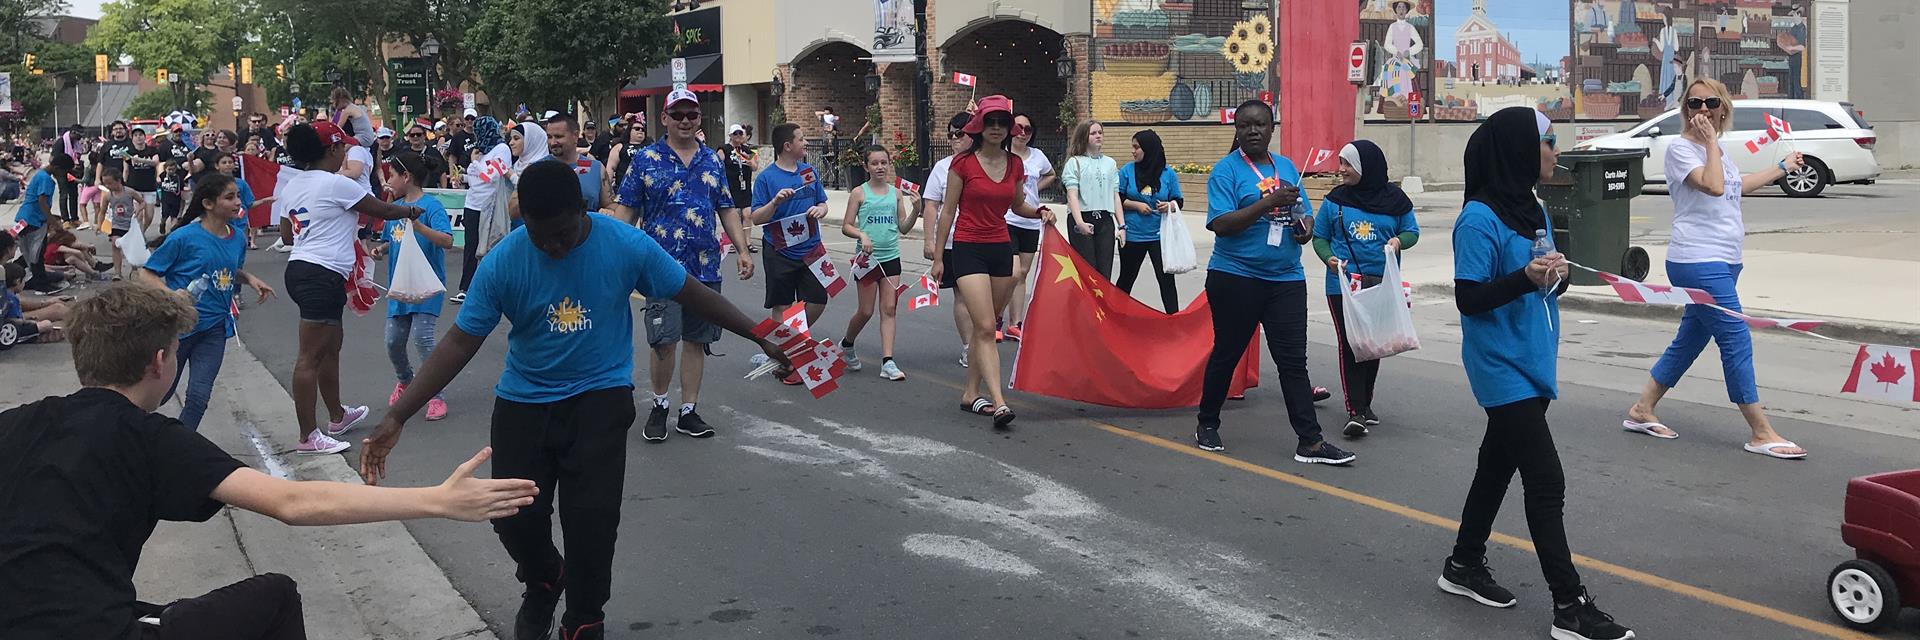 Group of people in a parade wearing blue shirts and waving Canadian flags.